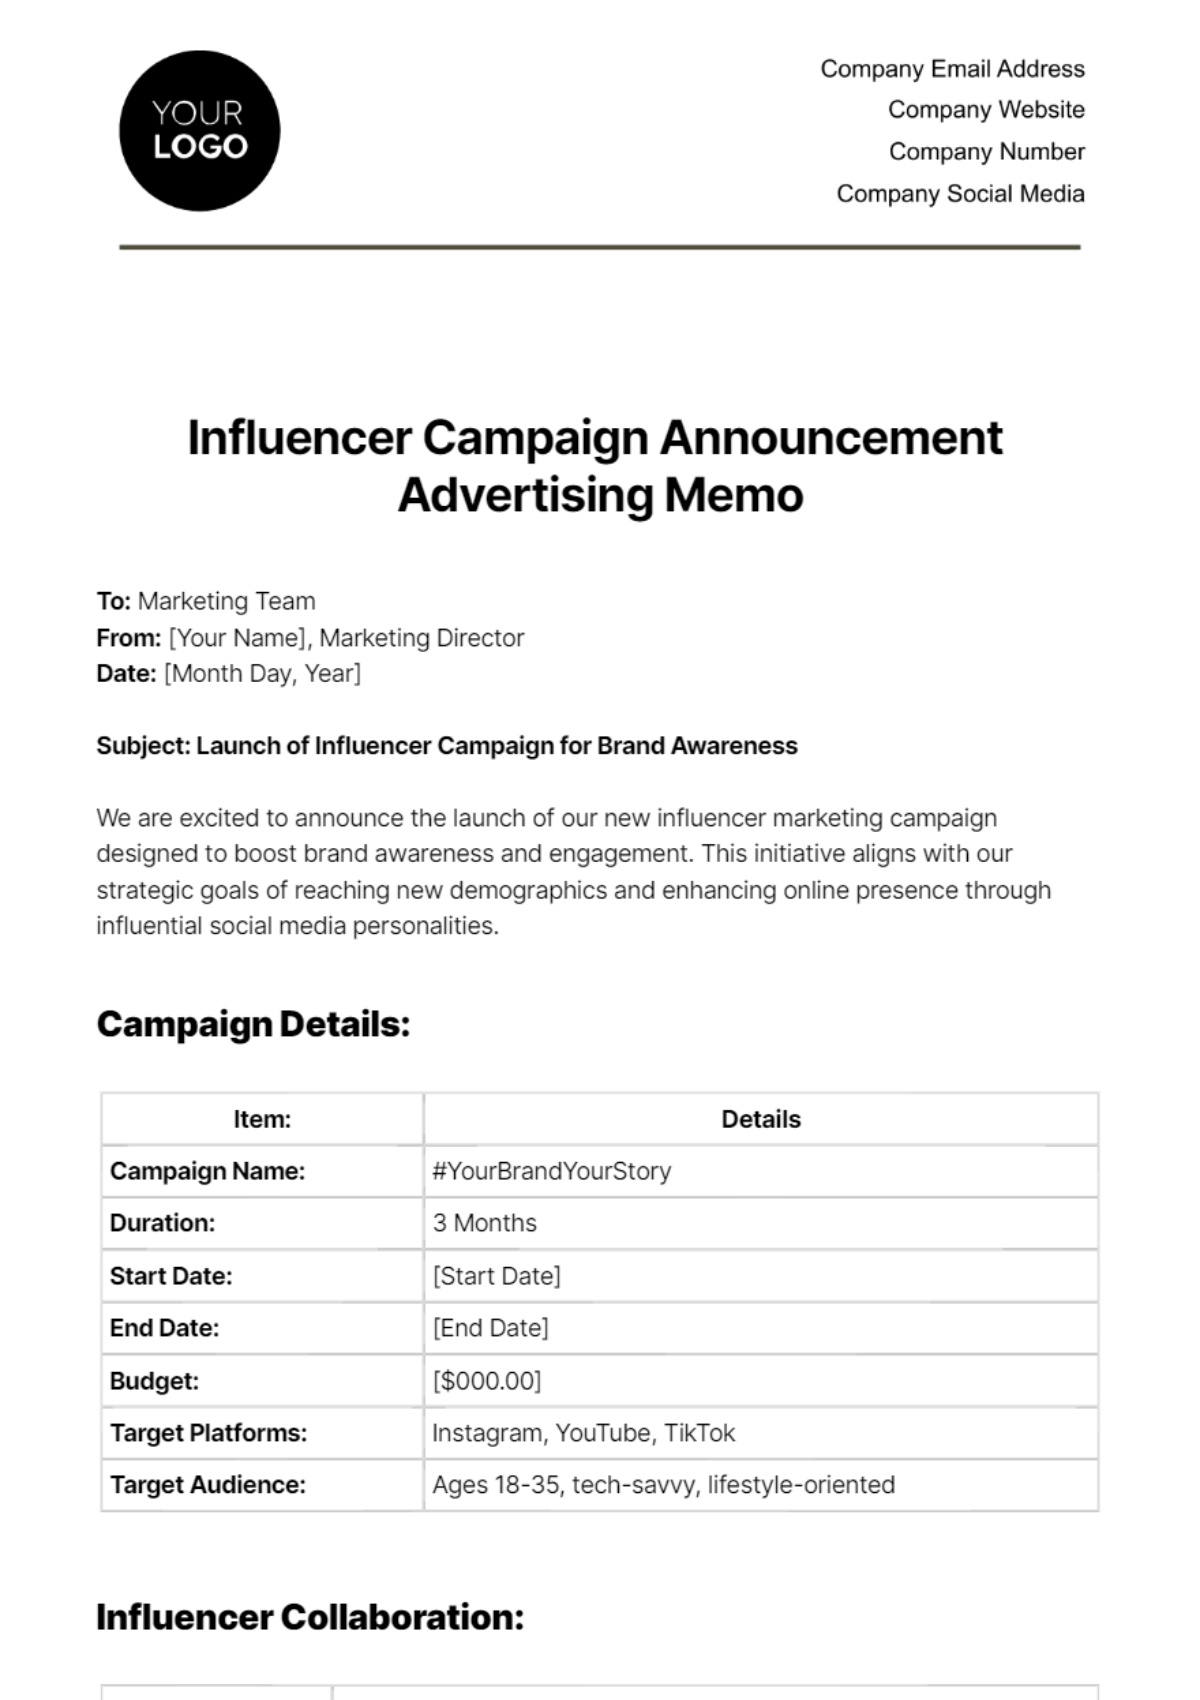 Influencer Campaign Announcement Advertising Memo Template